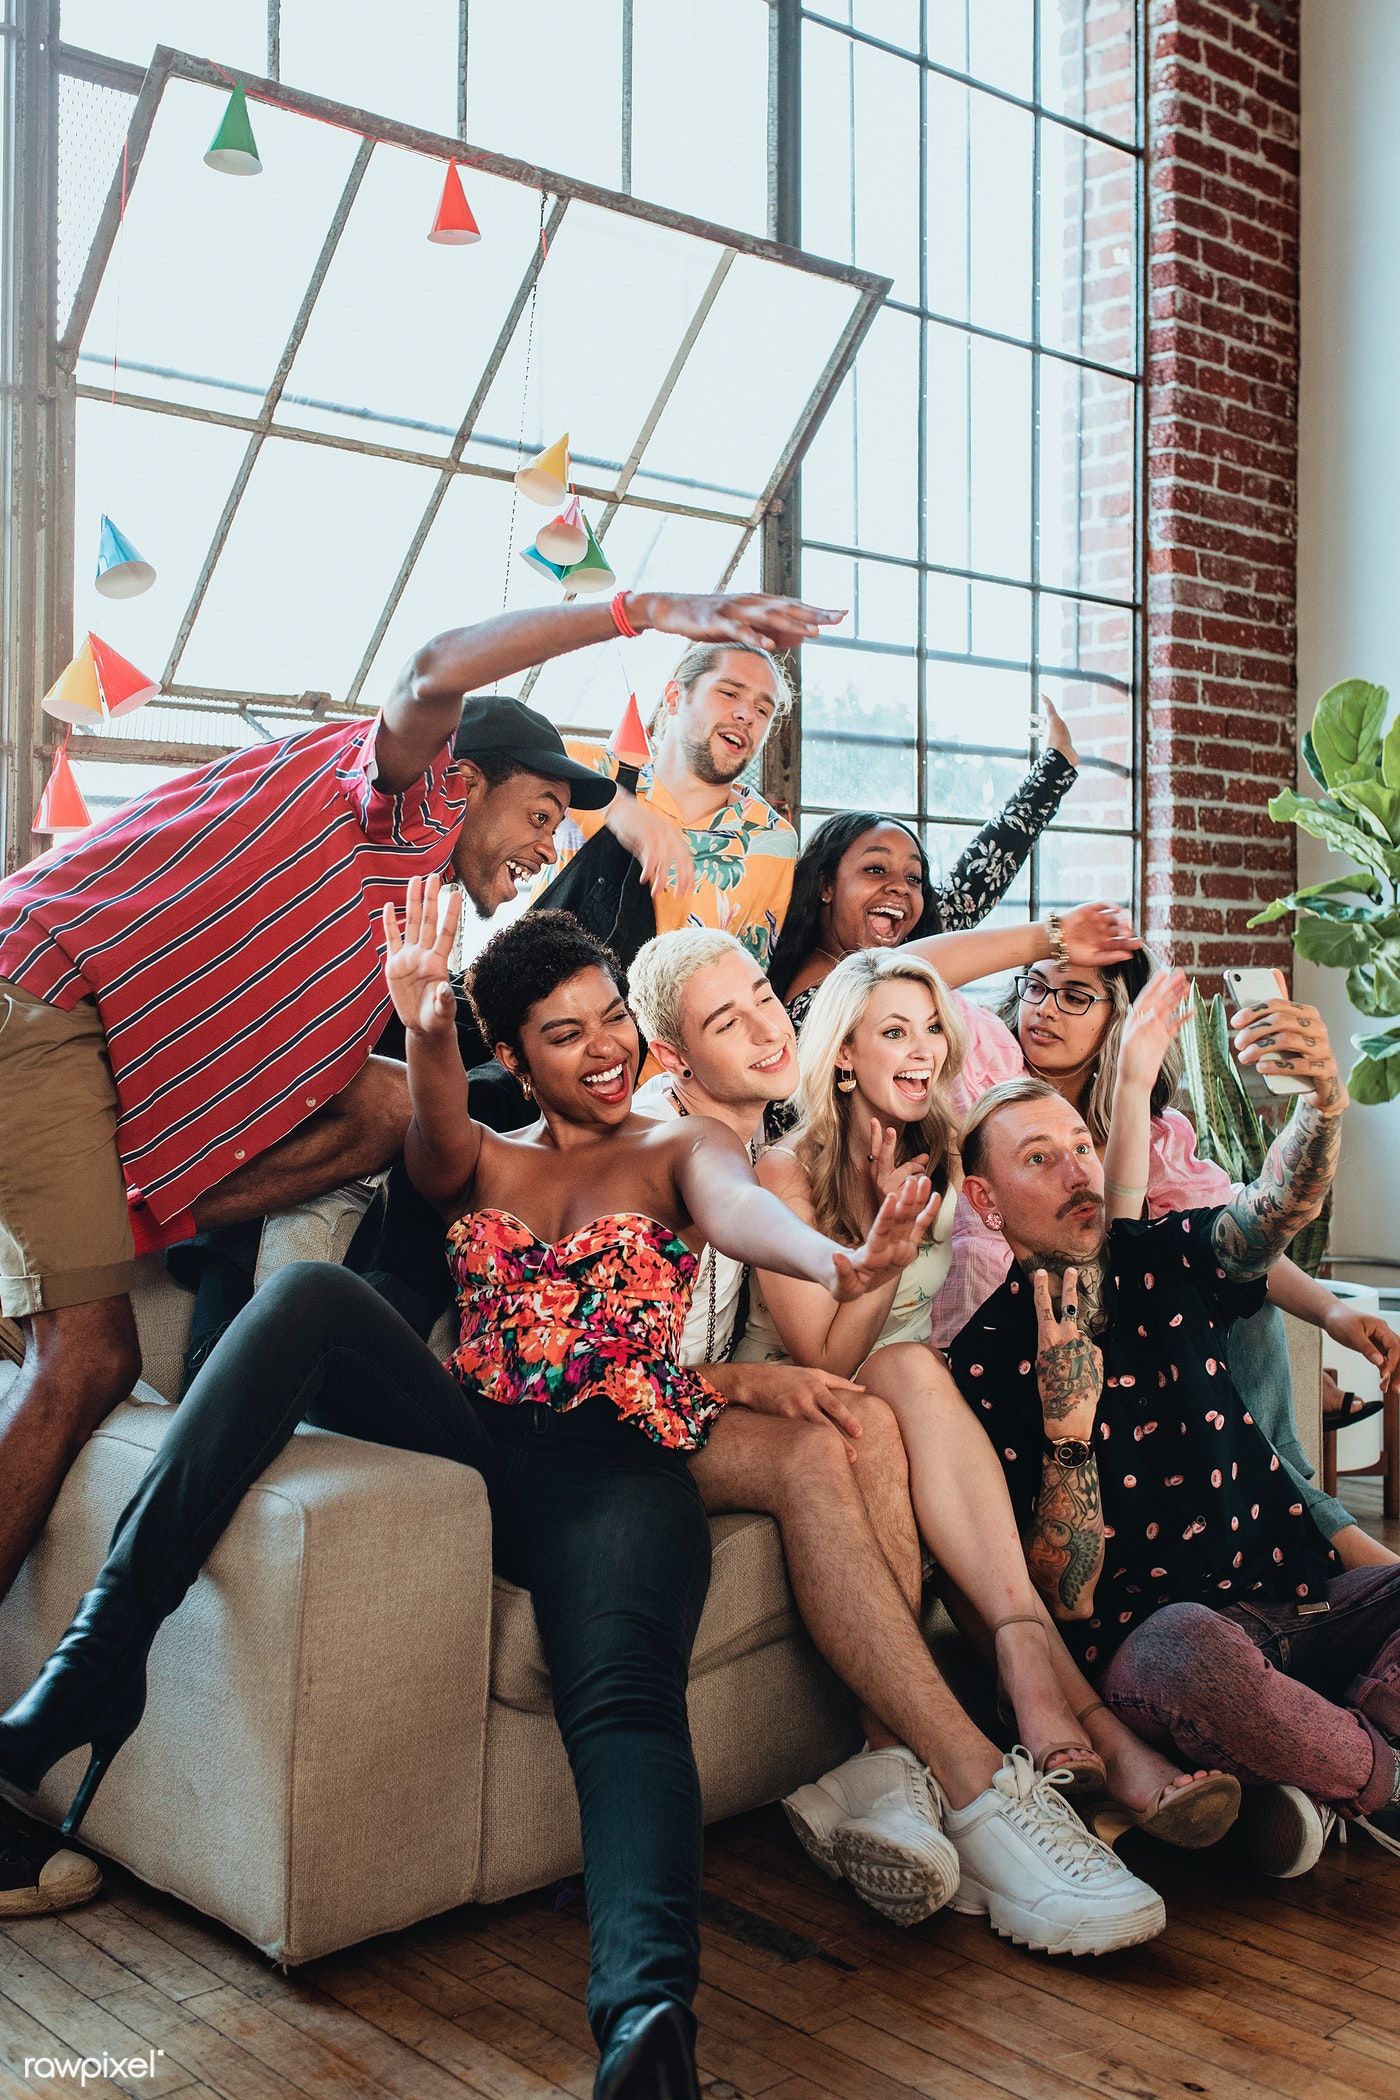 Download premium image of Diverse group of friends taking a selfie at a